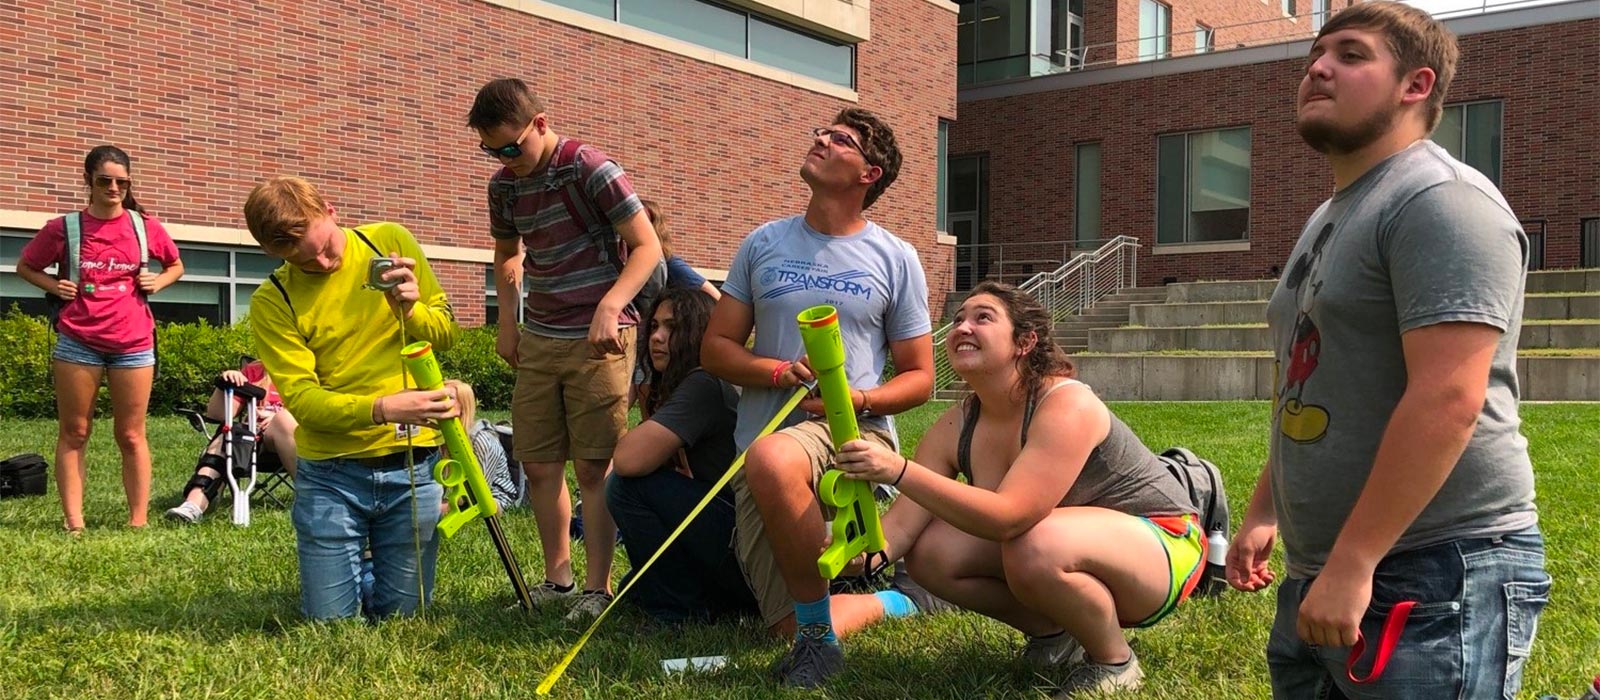 A group of engineering students observe as they launch a tennis ball into the sky with a launcher